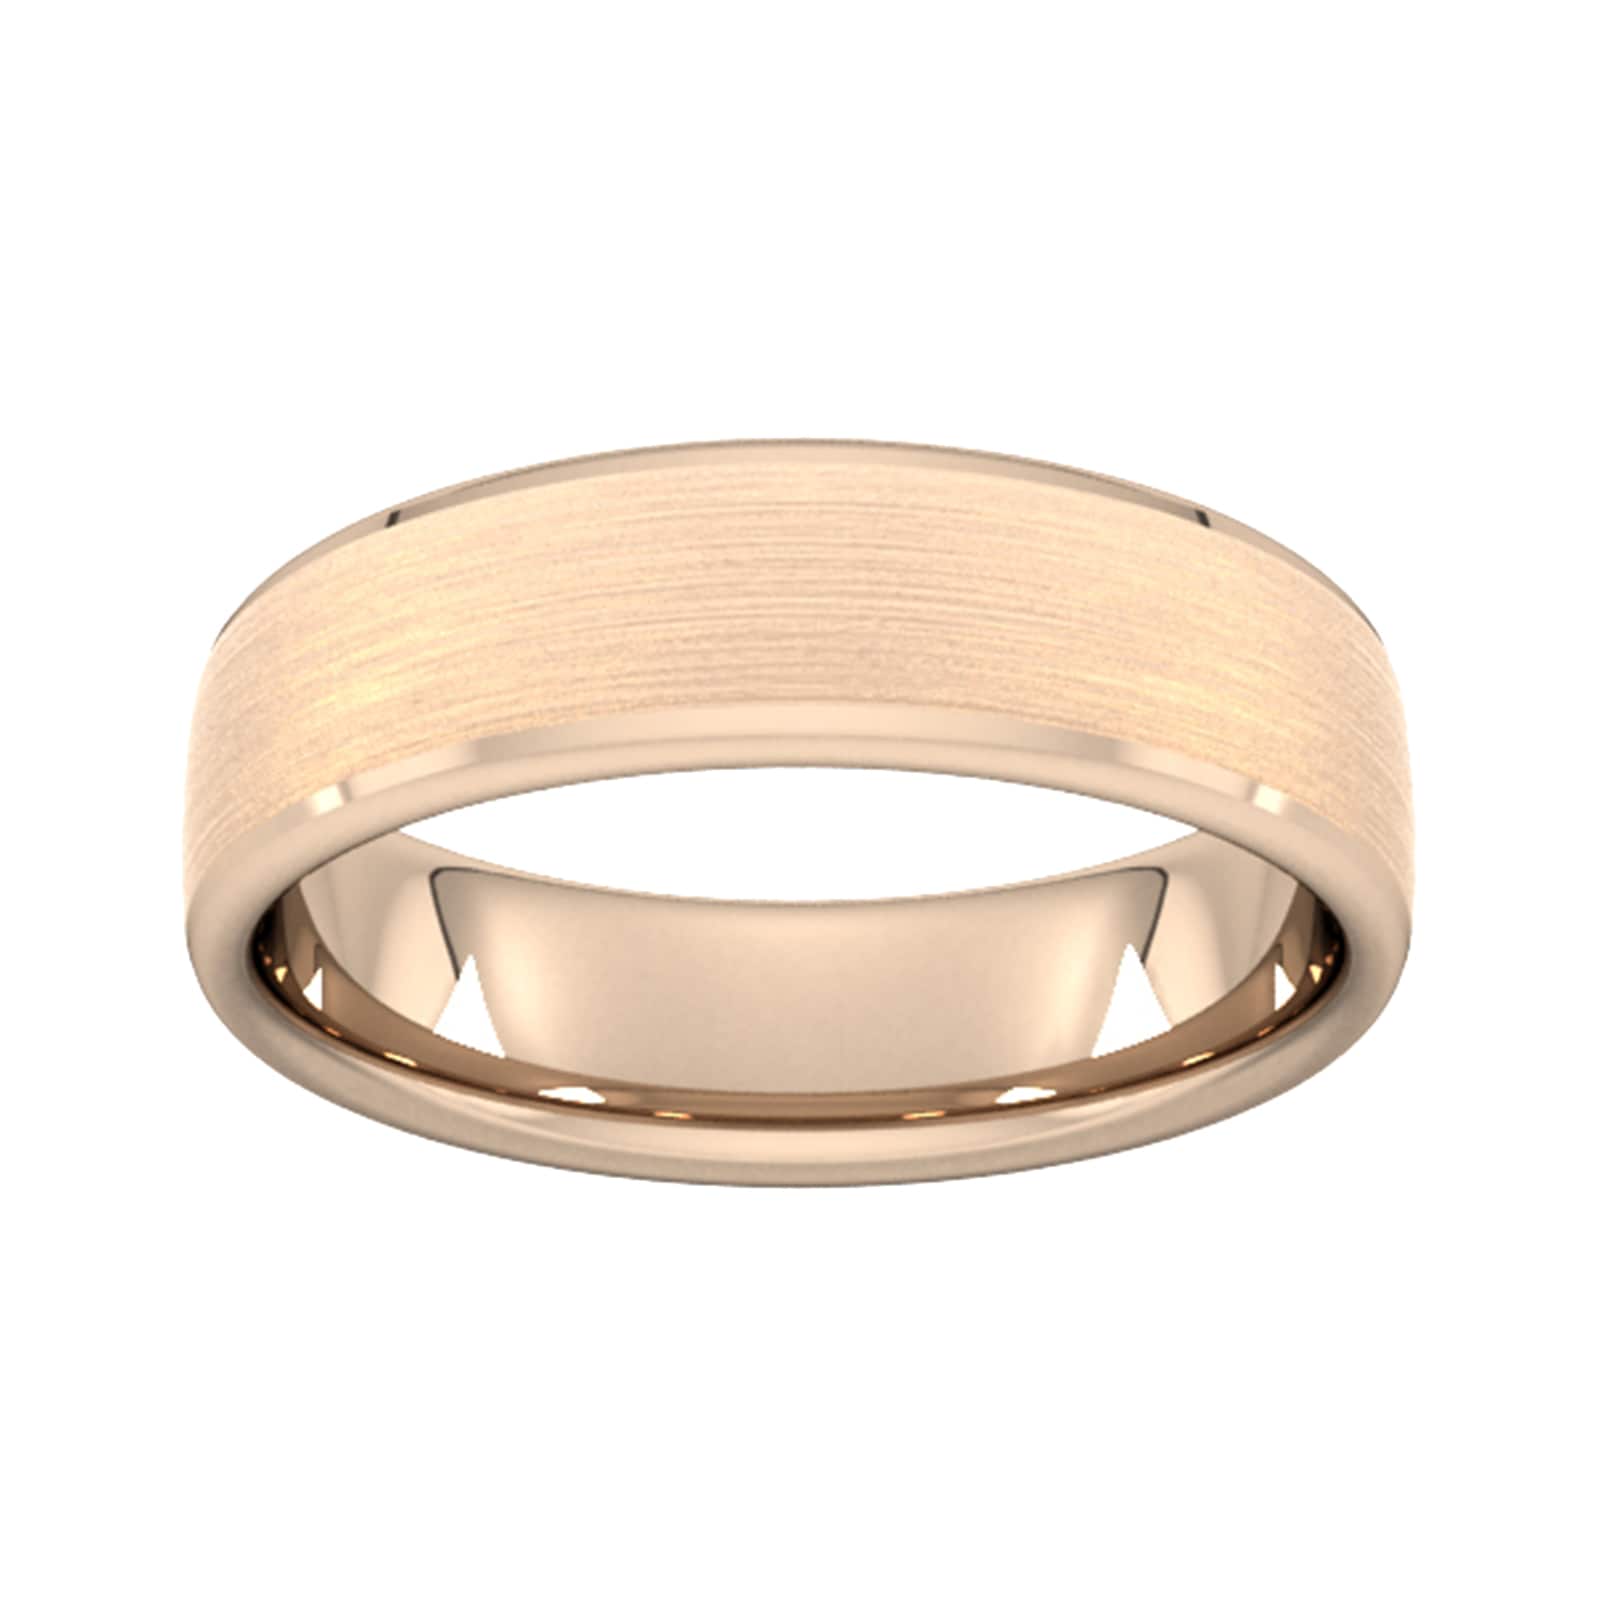 6mm D Shape Standard Polished Chamfered Edges With Matt Centre Wedding Ring In 9 Carat Rose Gold - Ring Size R